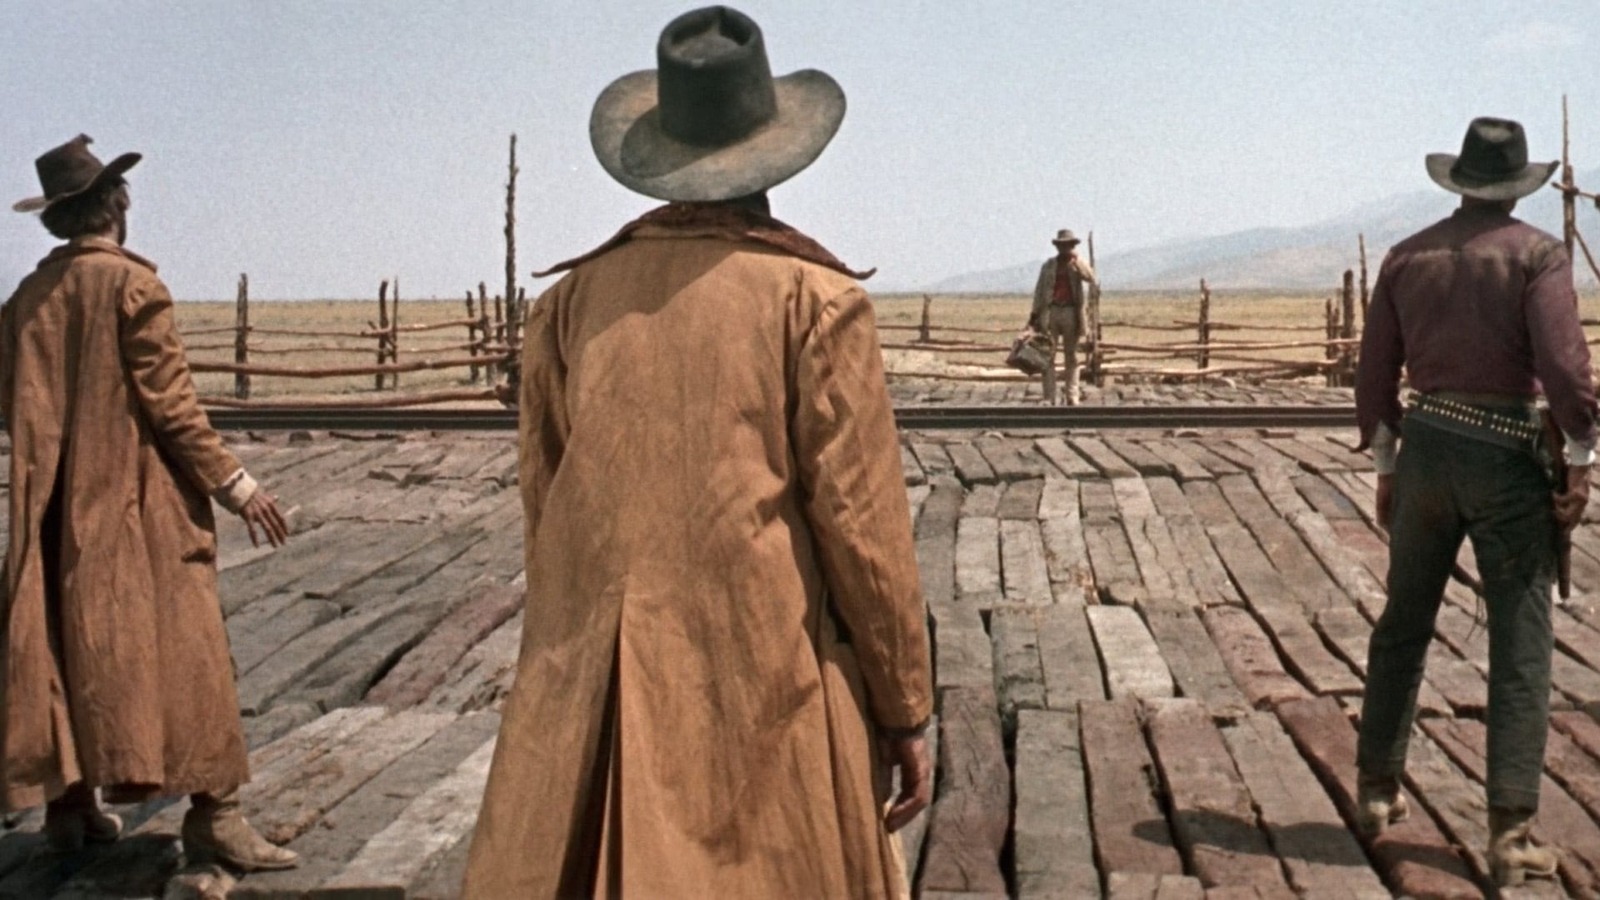 Throwing Once Upon A Time In The West to Clint Eastwood didn't go well for Sergio Leone